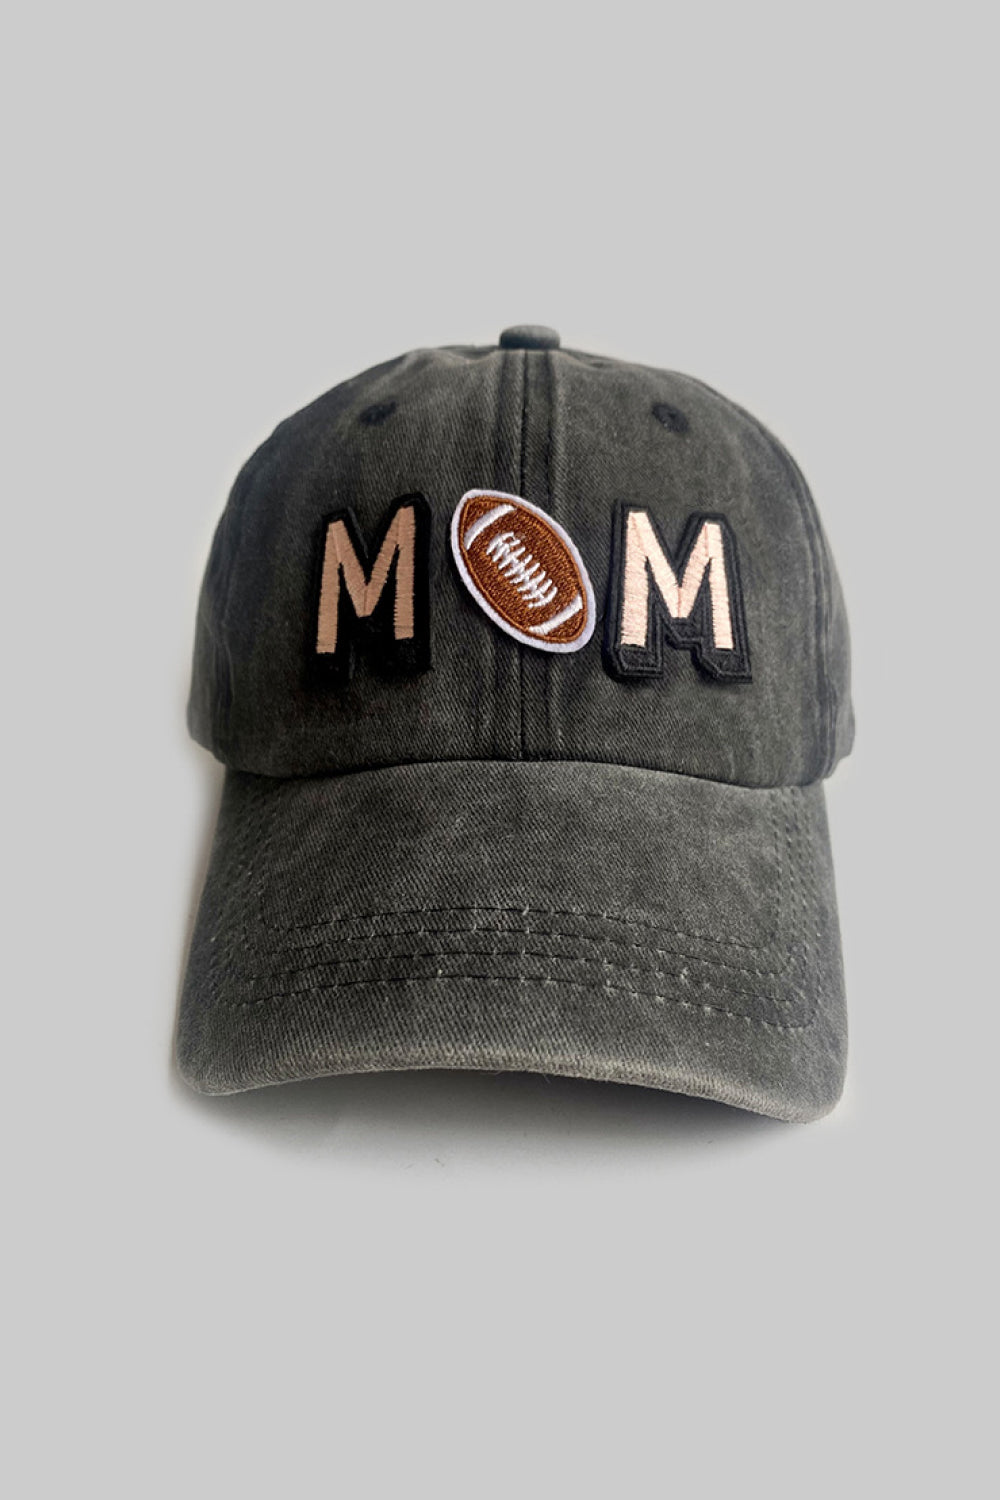 Sporty Mom Football Cap - Cheeky Chic Boutique